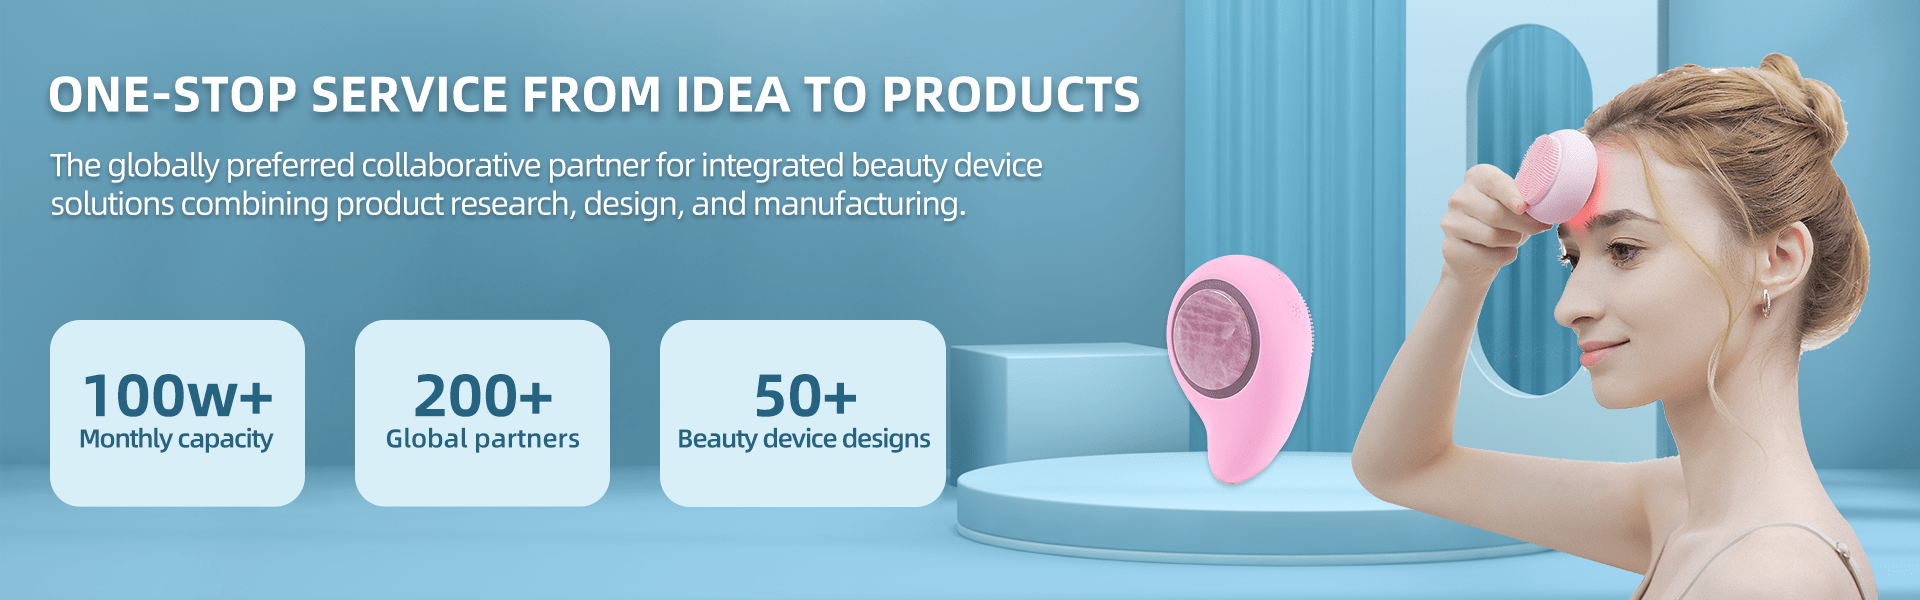 Beauty device solutions	